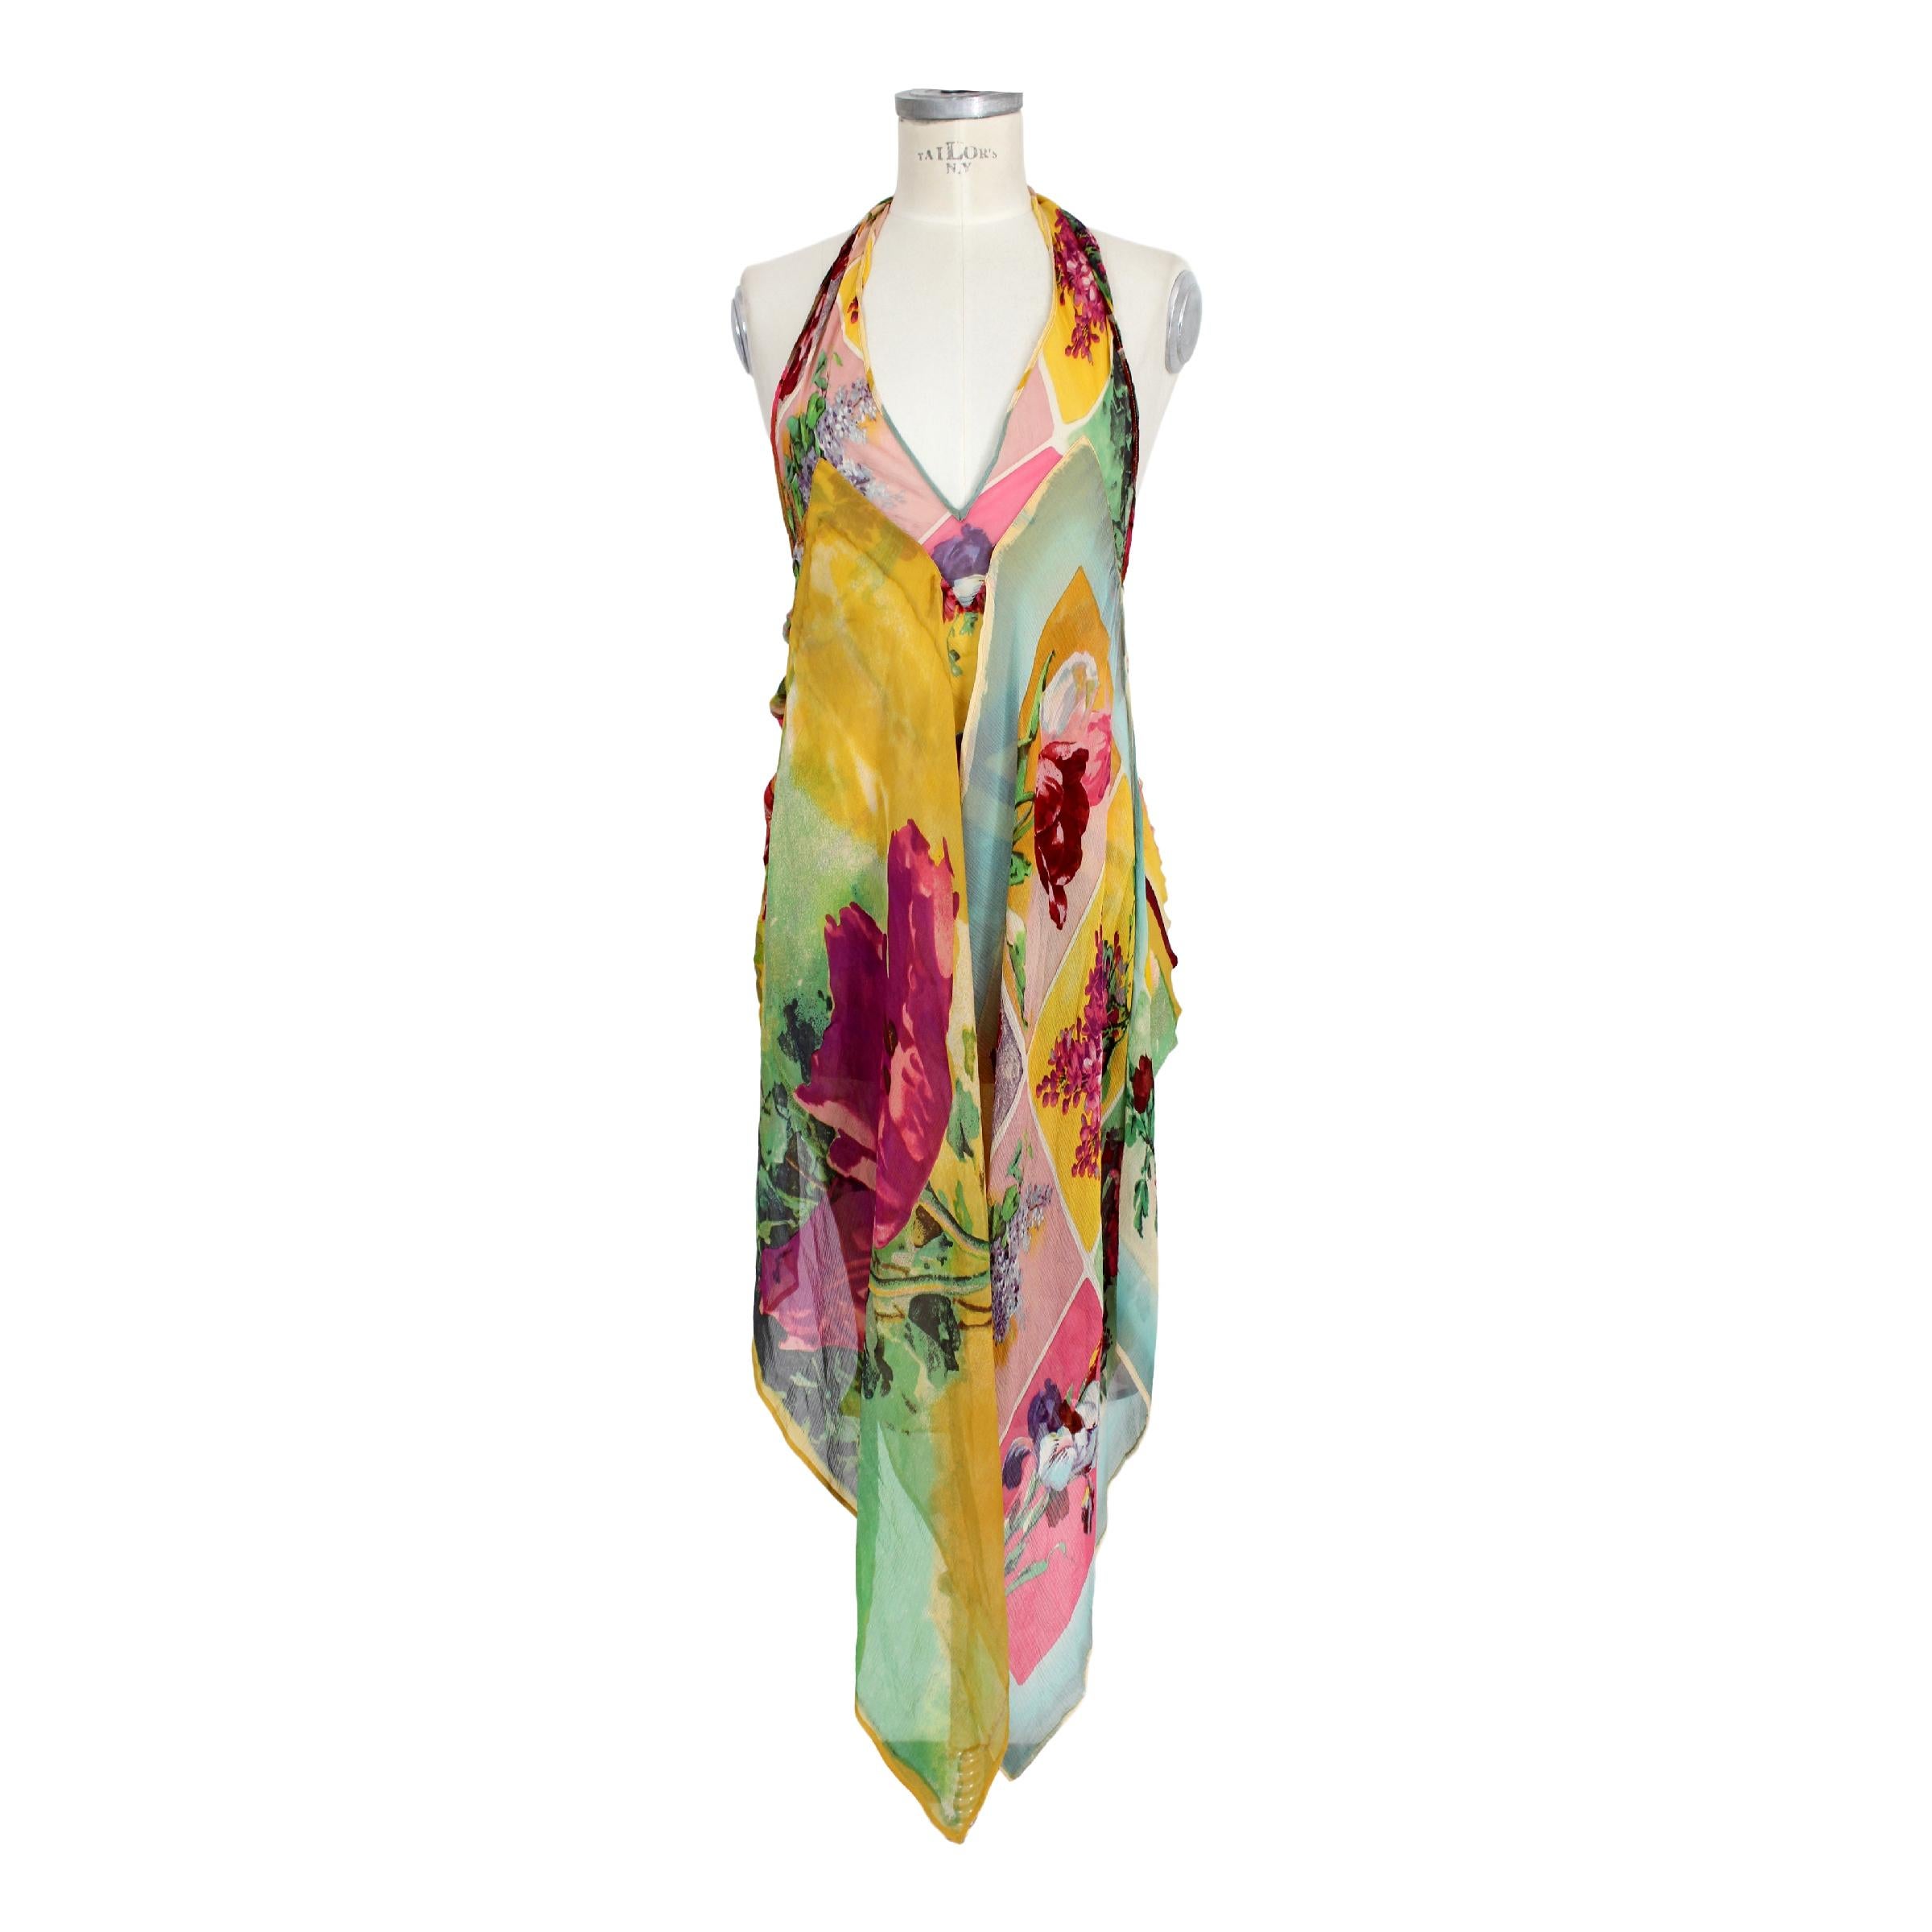 Jean Paul Gaultier Femme vintage short dress, 100% transparent silk, American neckline, multicolored floral designs. Sleeveless, drapes on the front along the dress. 90s. Made in Italy. Excellent vintage condition. 

Size: 40 It 8 Us 10 Uk